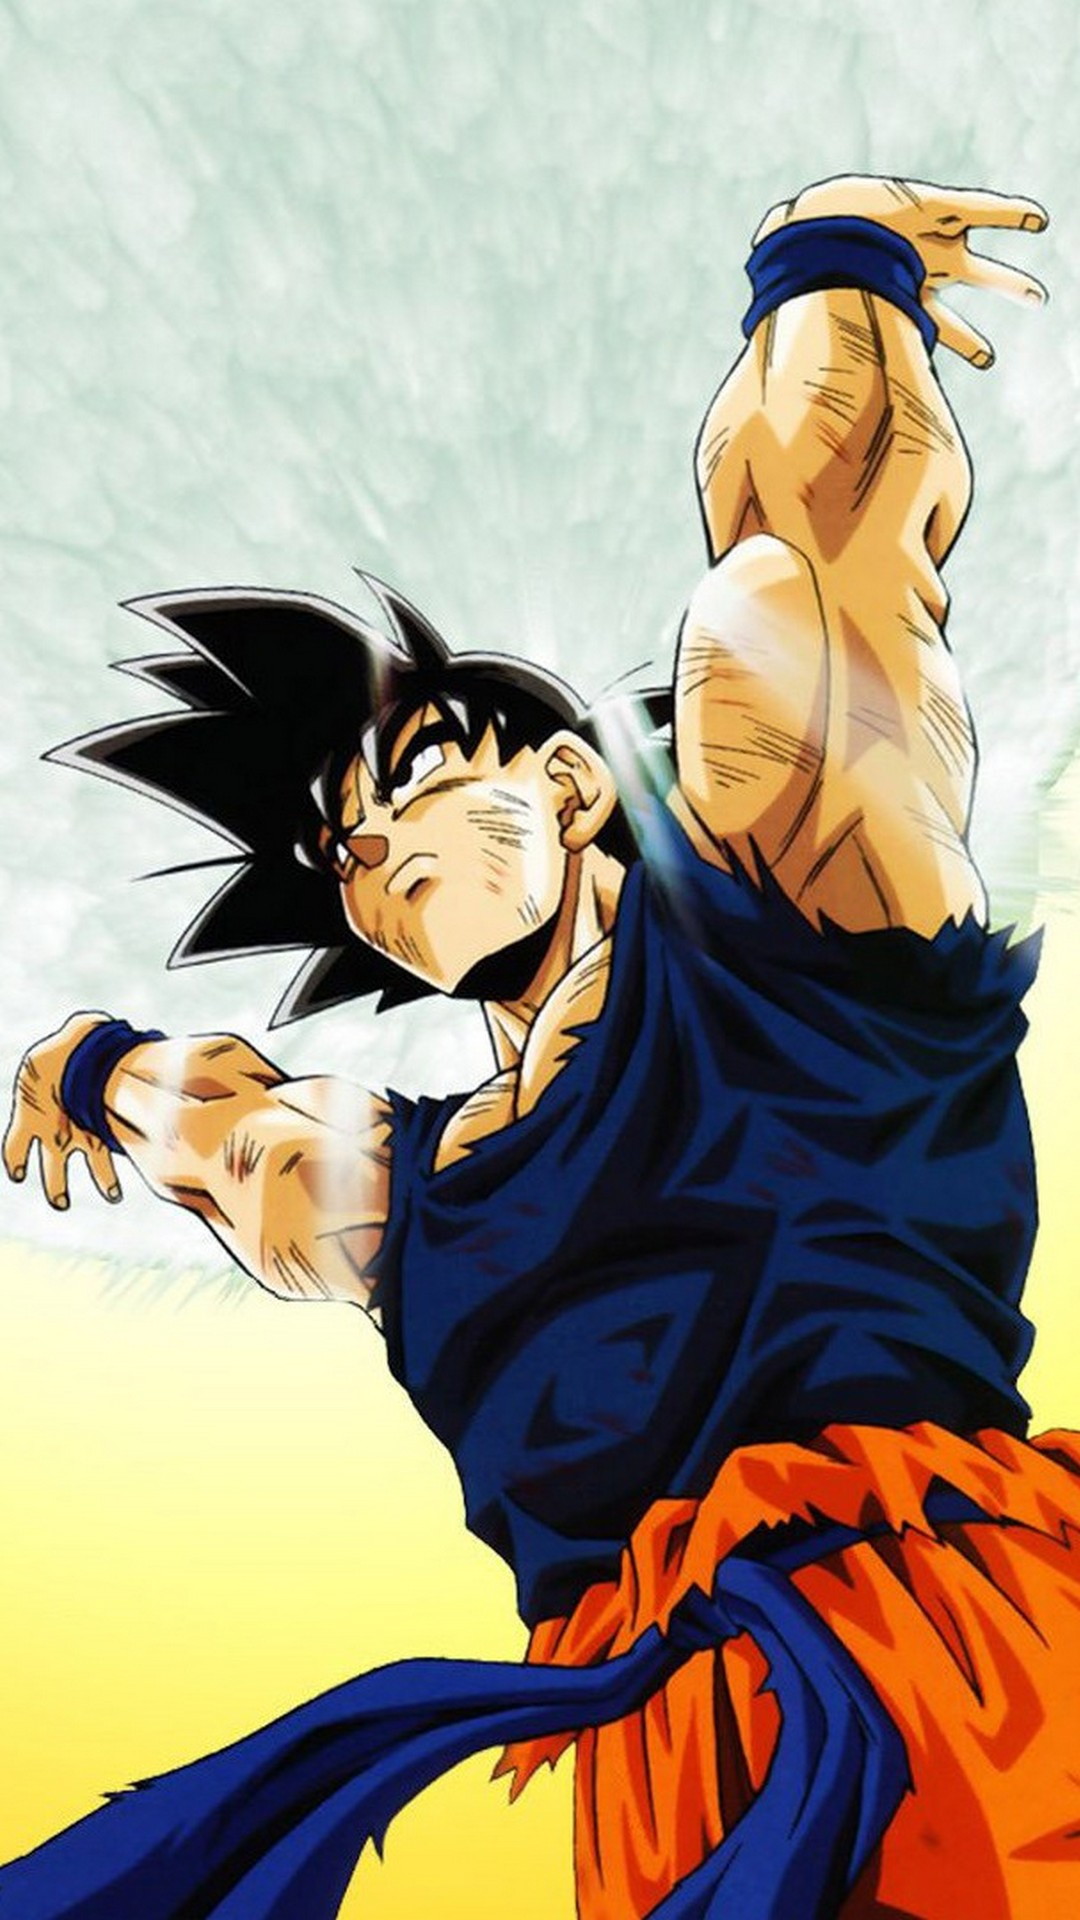 Wallpaper Mobile Goku Images with high-resolution 1080x1920 pixel. You can use and set as wallpaper for Notebook Screensavers, Mac Wallpapers, Mobile Home Screen, iPhone or Android Phones Lock Screen